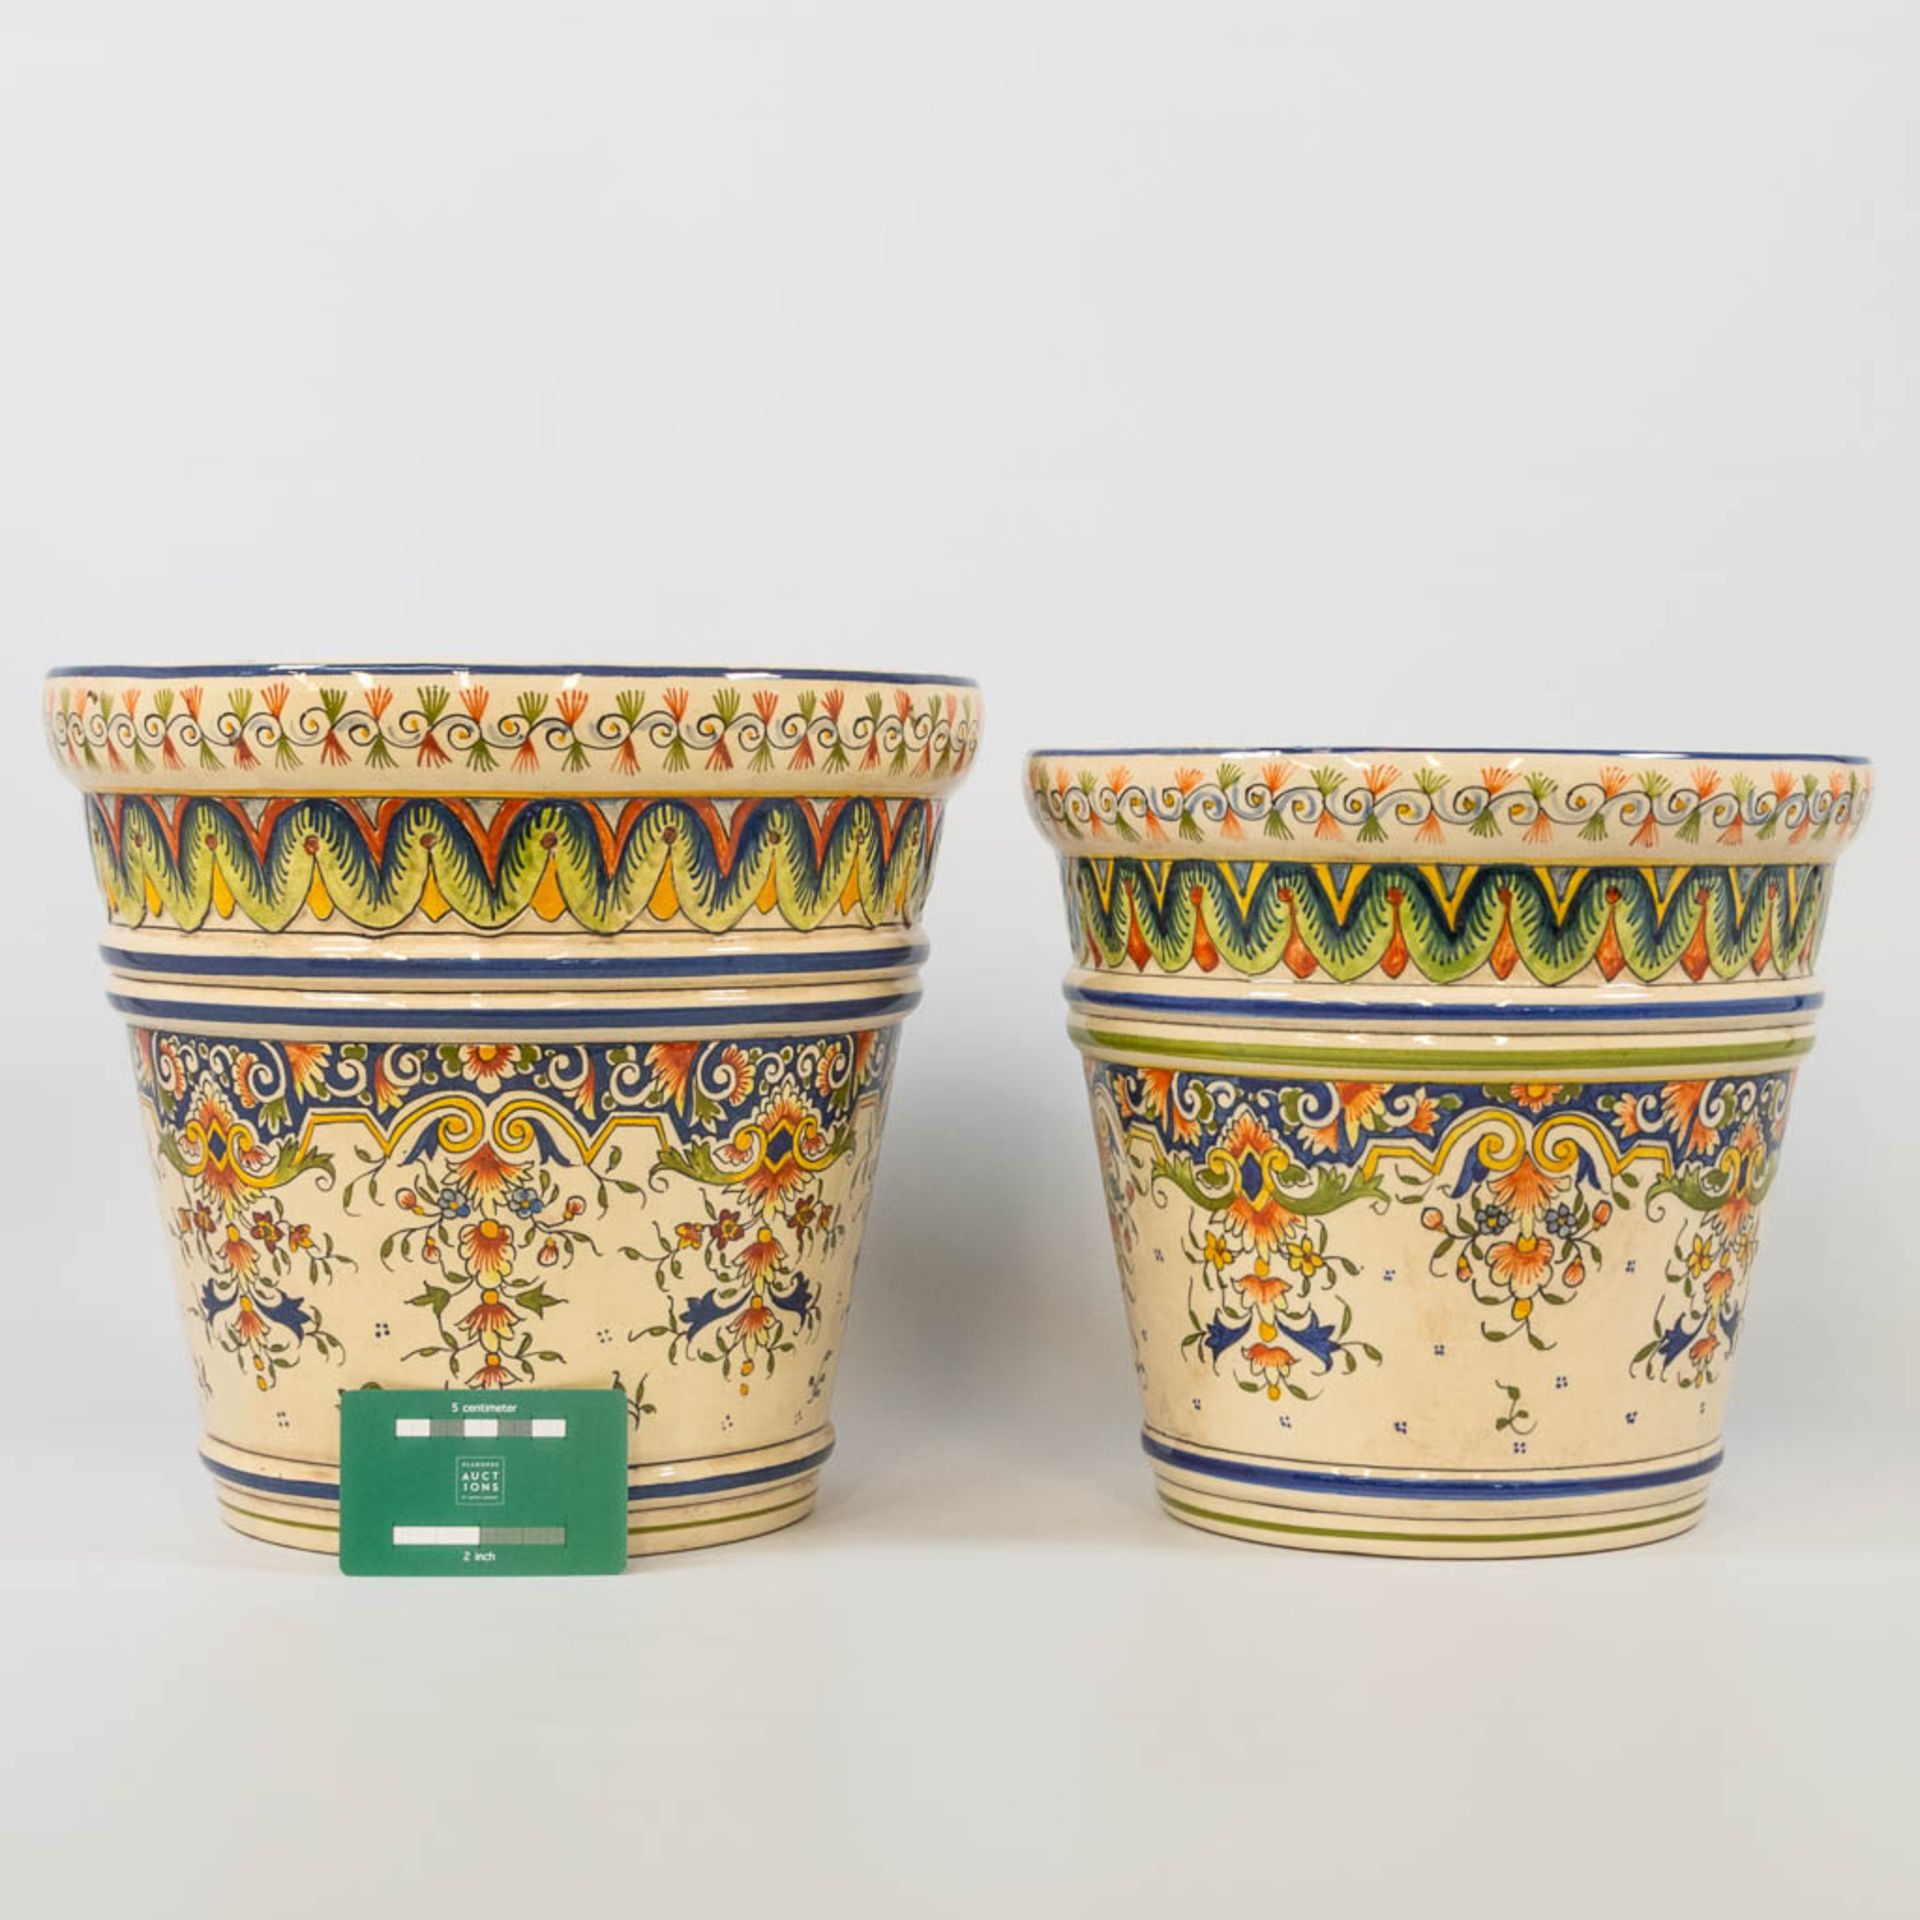 A collection of 2 cache-pots in two sizes with hand-painted decor, made of faience in Rouen, France. - Bild 4 aus 12